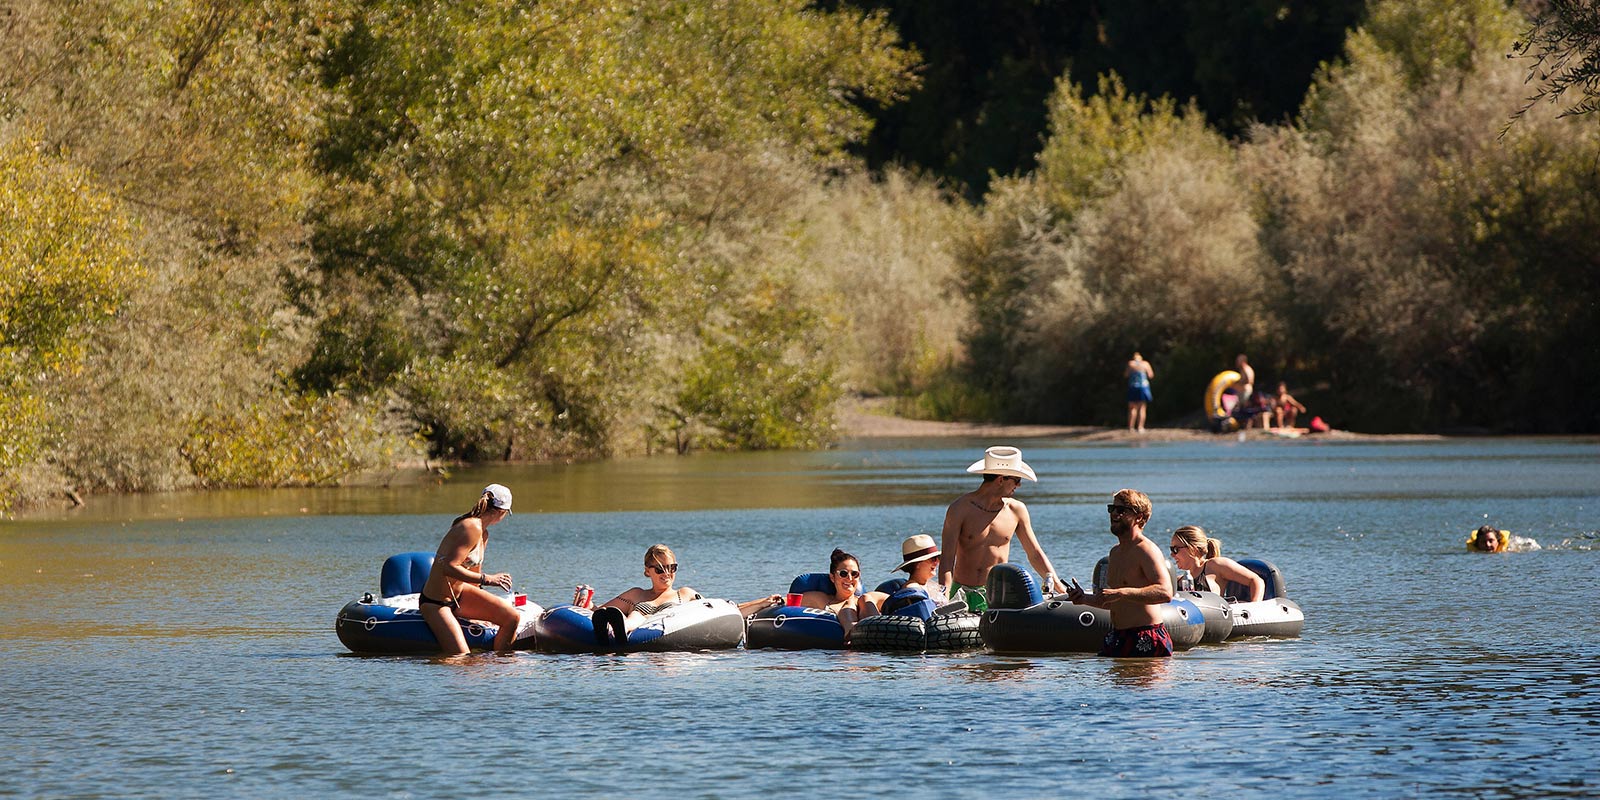 Tubing on the Russian River